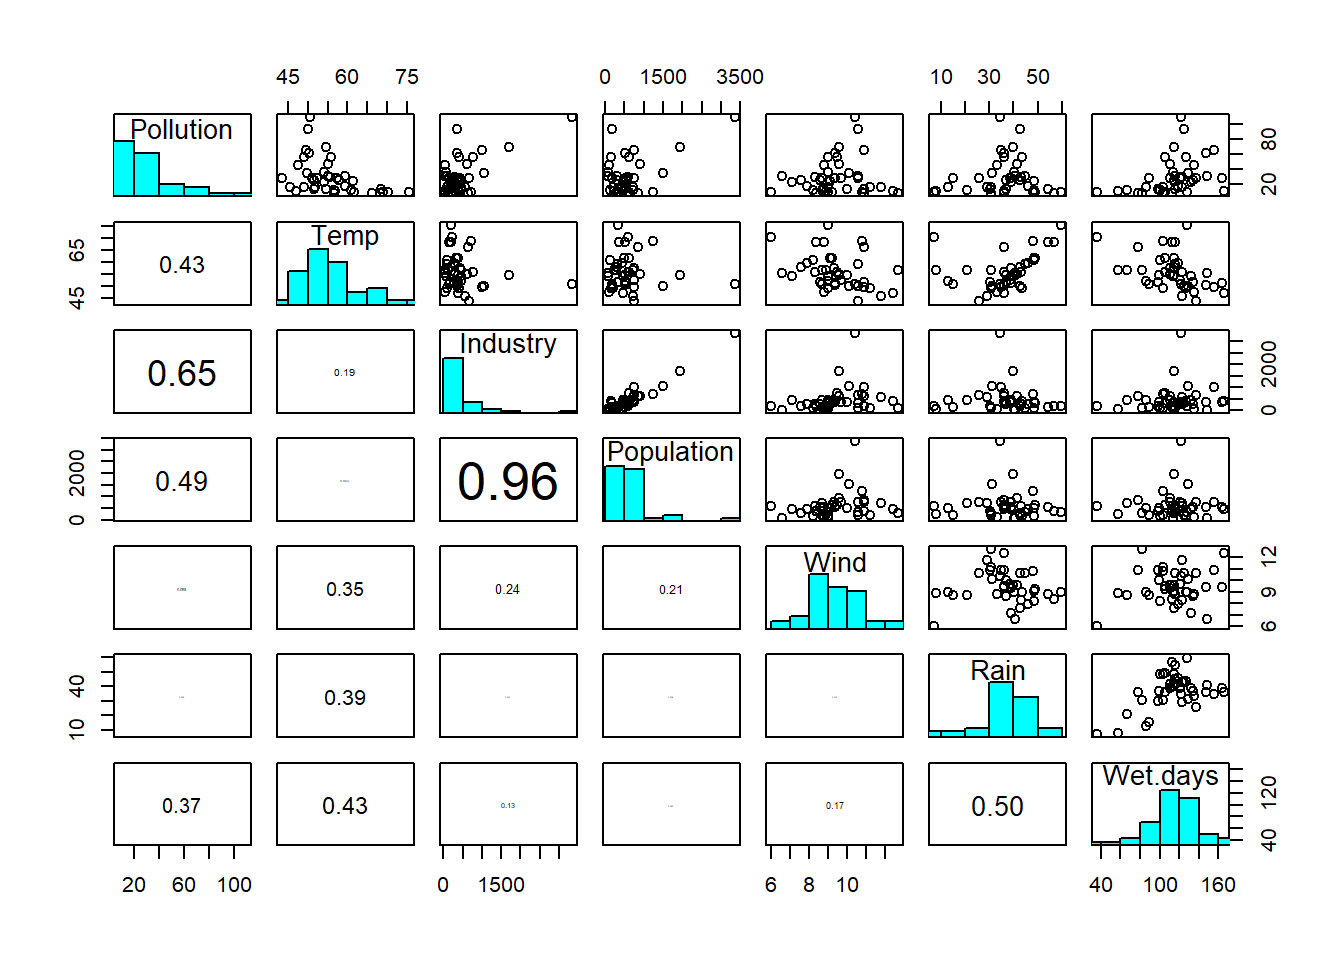 Scatterplot matrix of sulphur dataset: Pollution = sulphur dioxide concentration; Temp = air temperature; Industry = prevalence of industry; Population = population size; Wind = wind speed; Rain = rainfall; Wet-days = number of wet days. Data from: @crawley2012